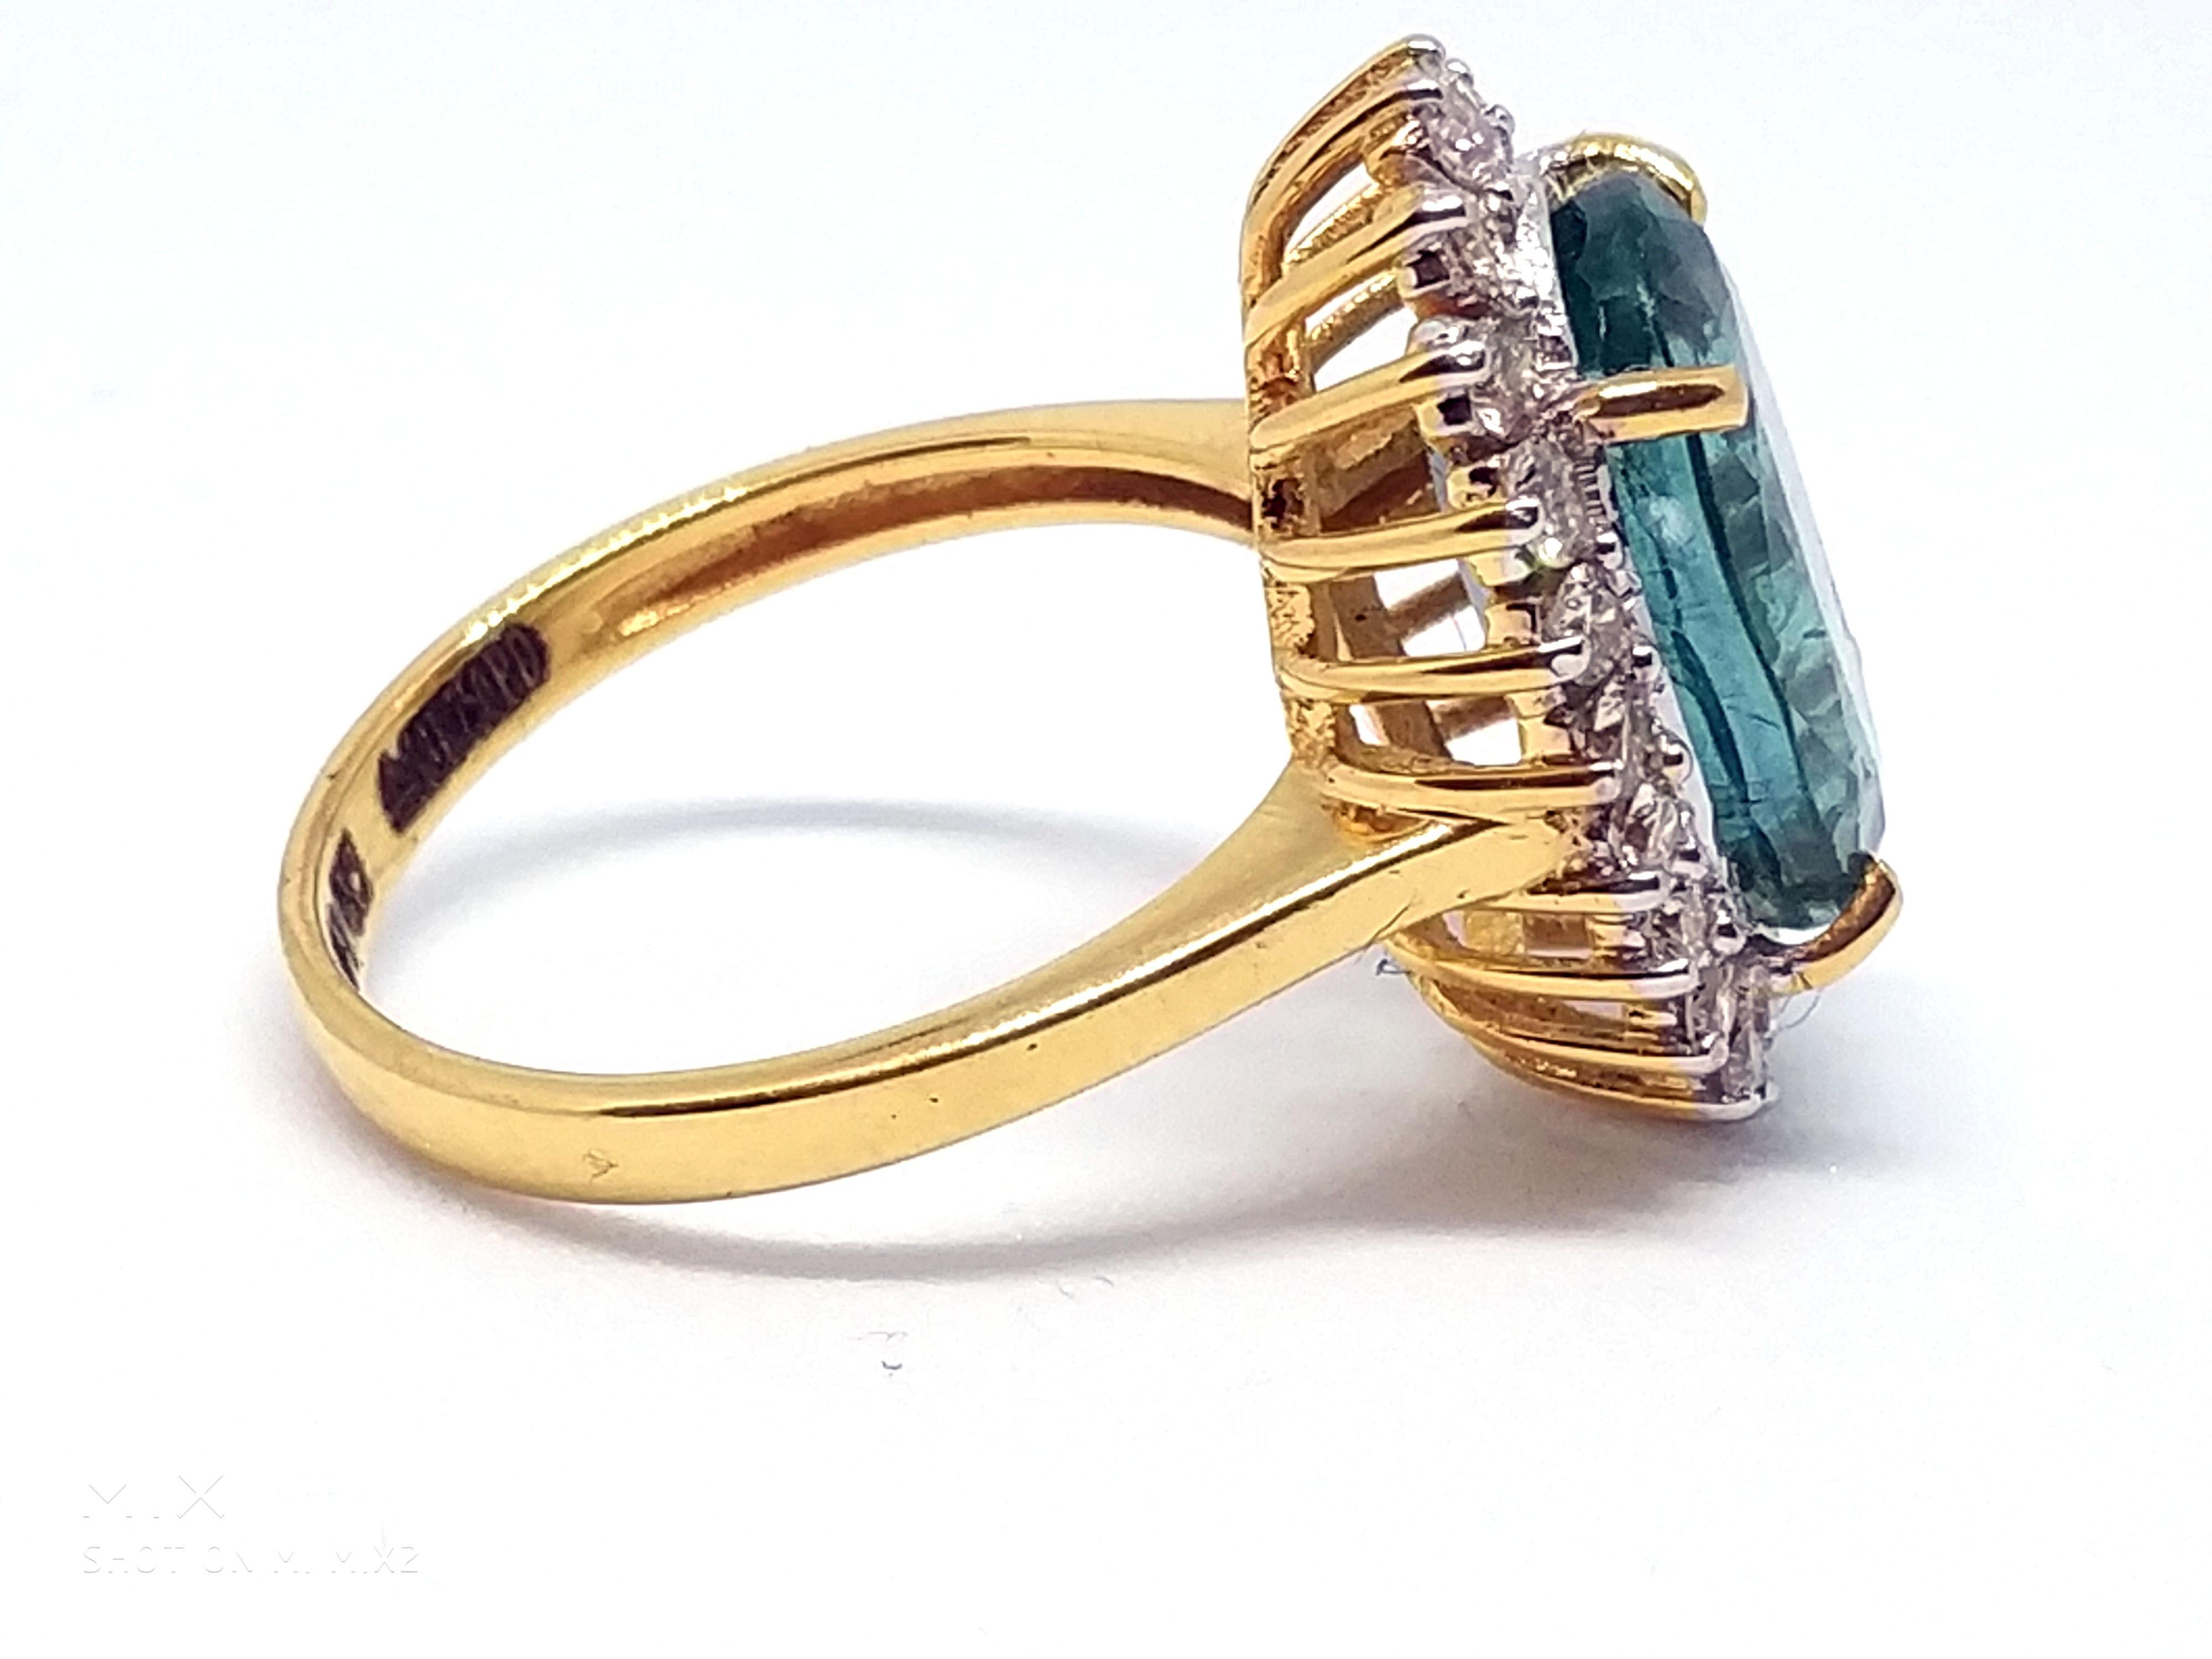 Emerald Cut 9.95 Carat Emerald and Diamond Ring For Sale